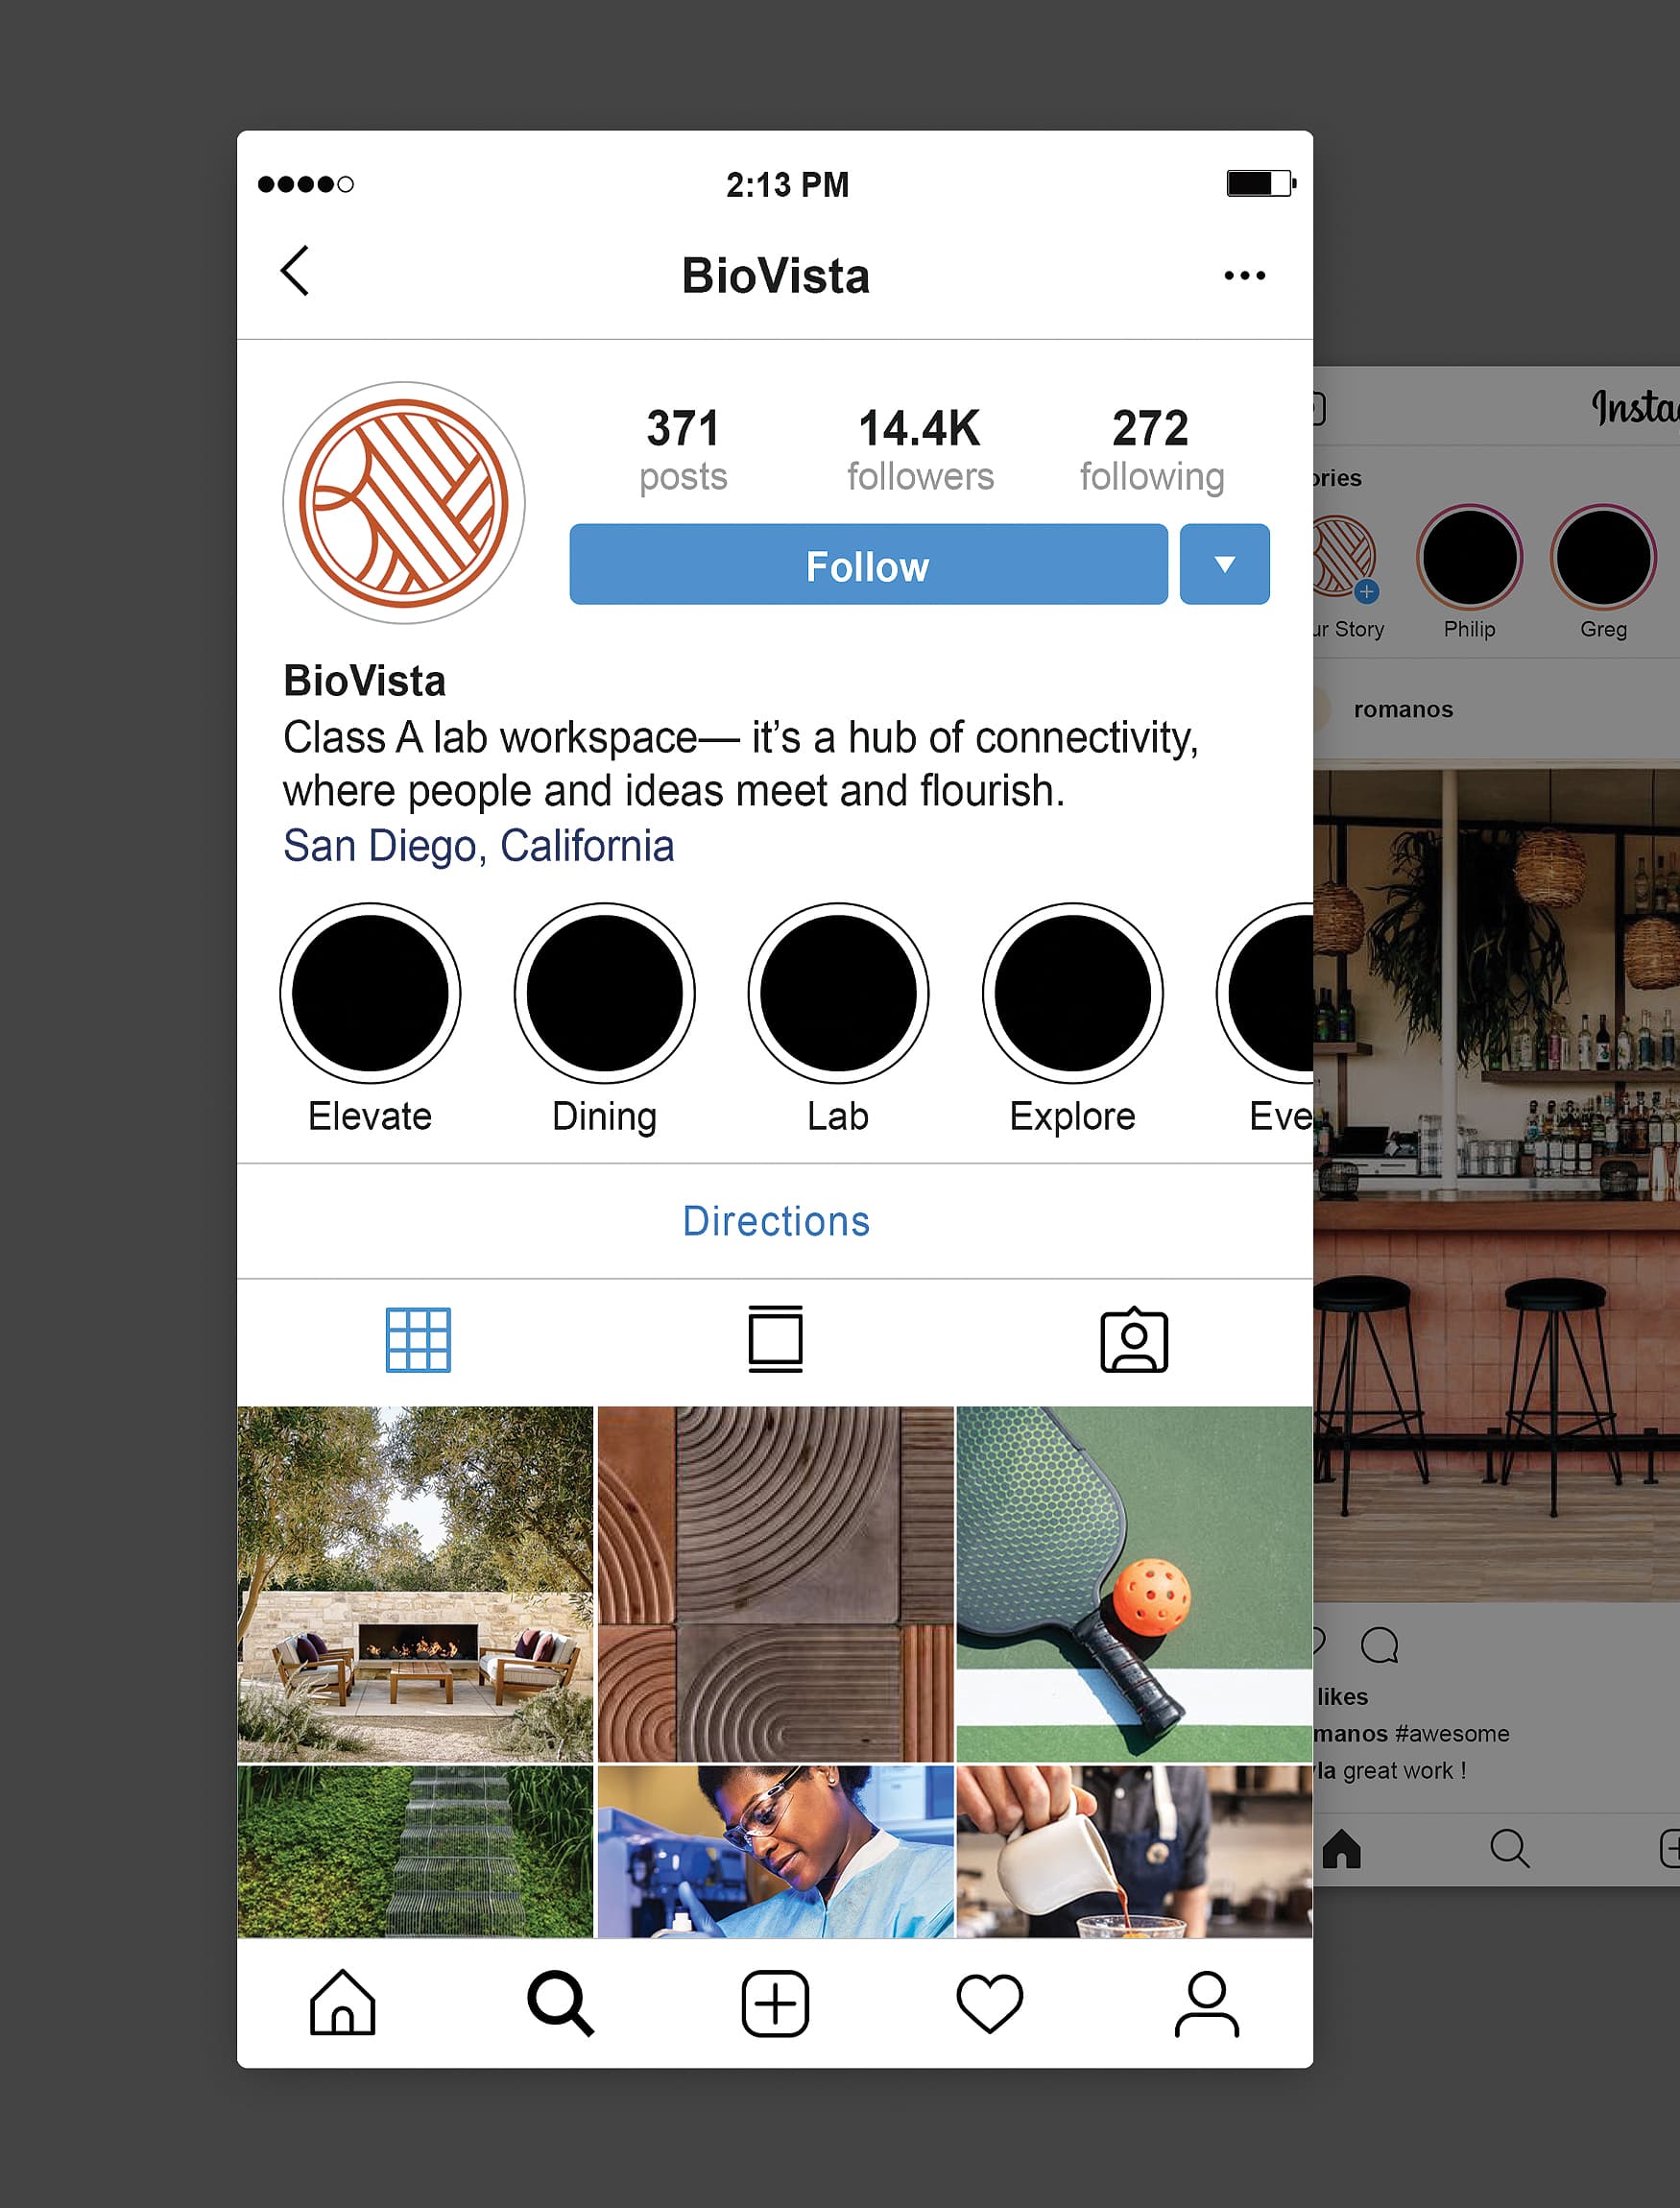 BioVista social media mockup for Instagram page and feed.